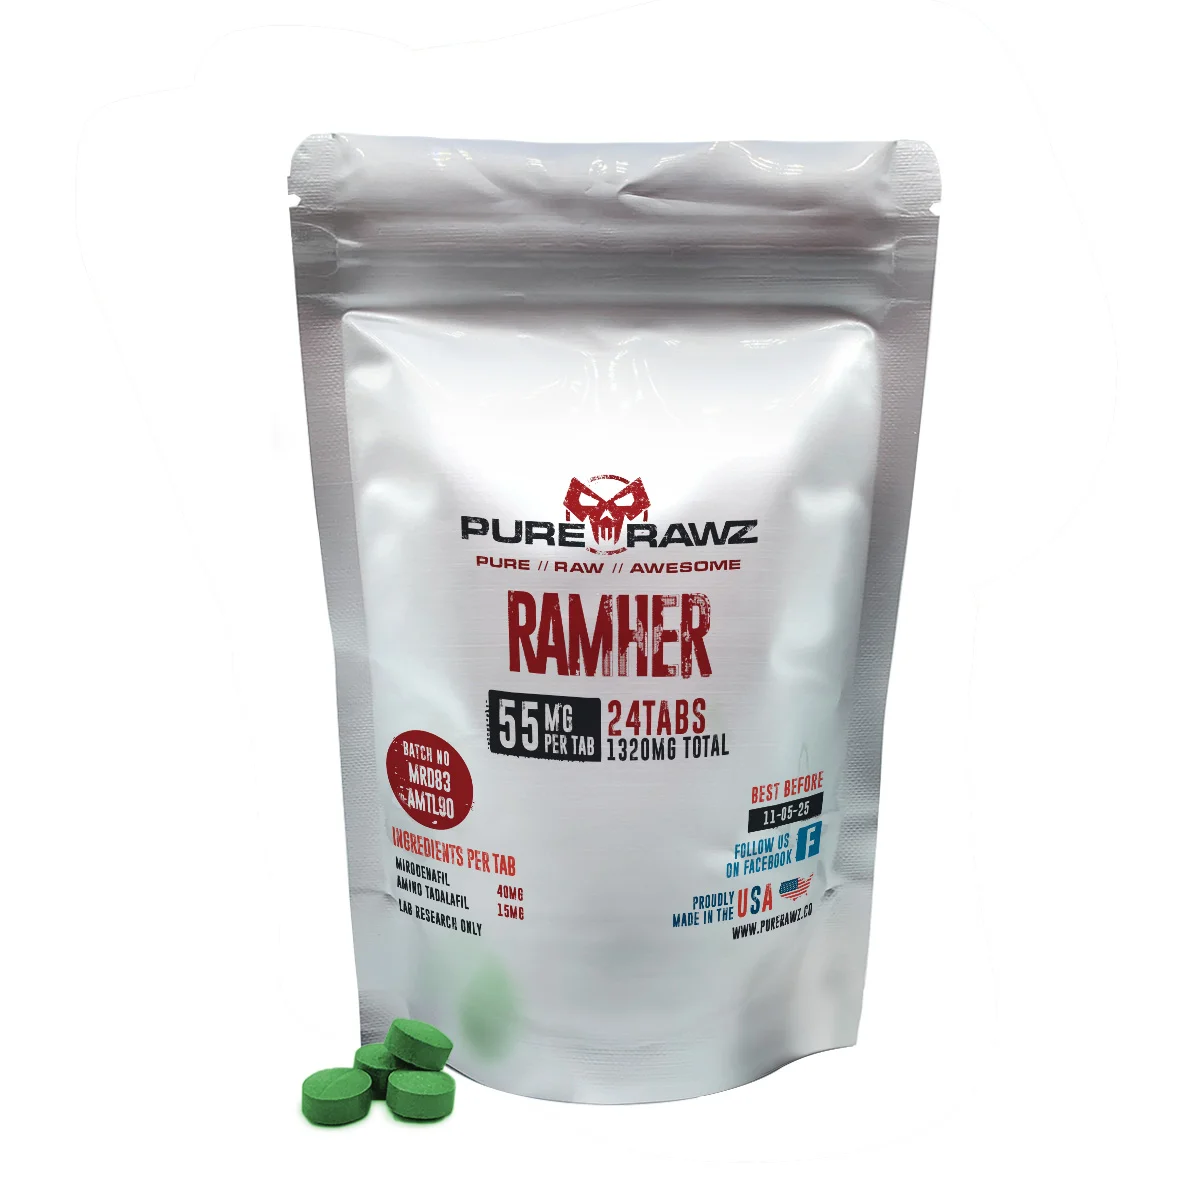 Ramher Product Image